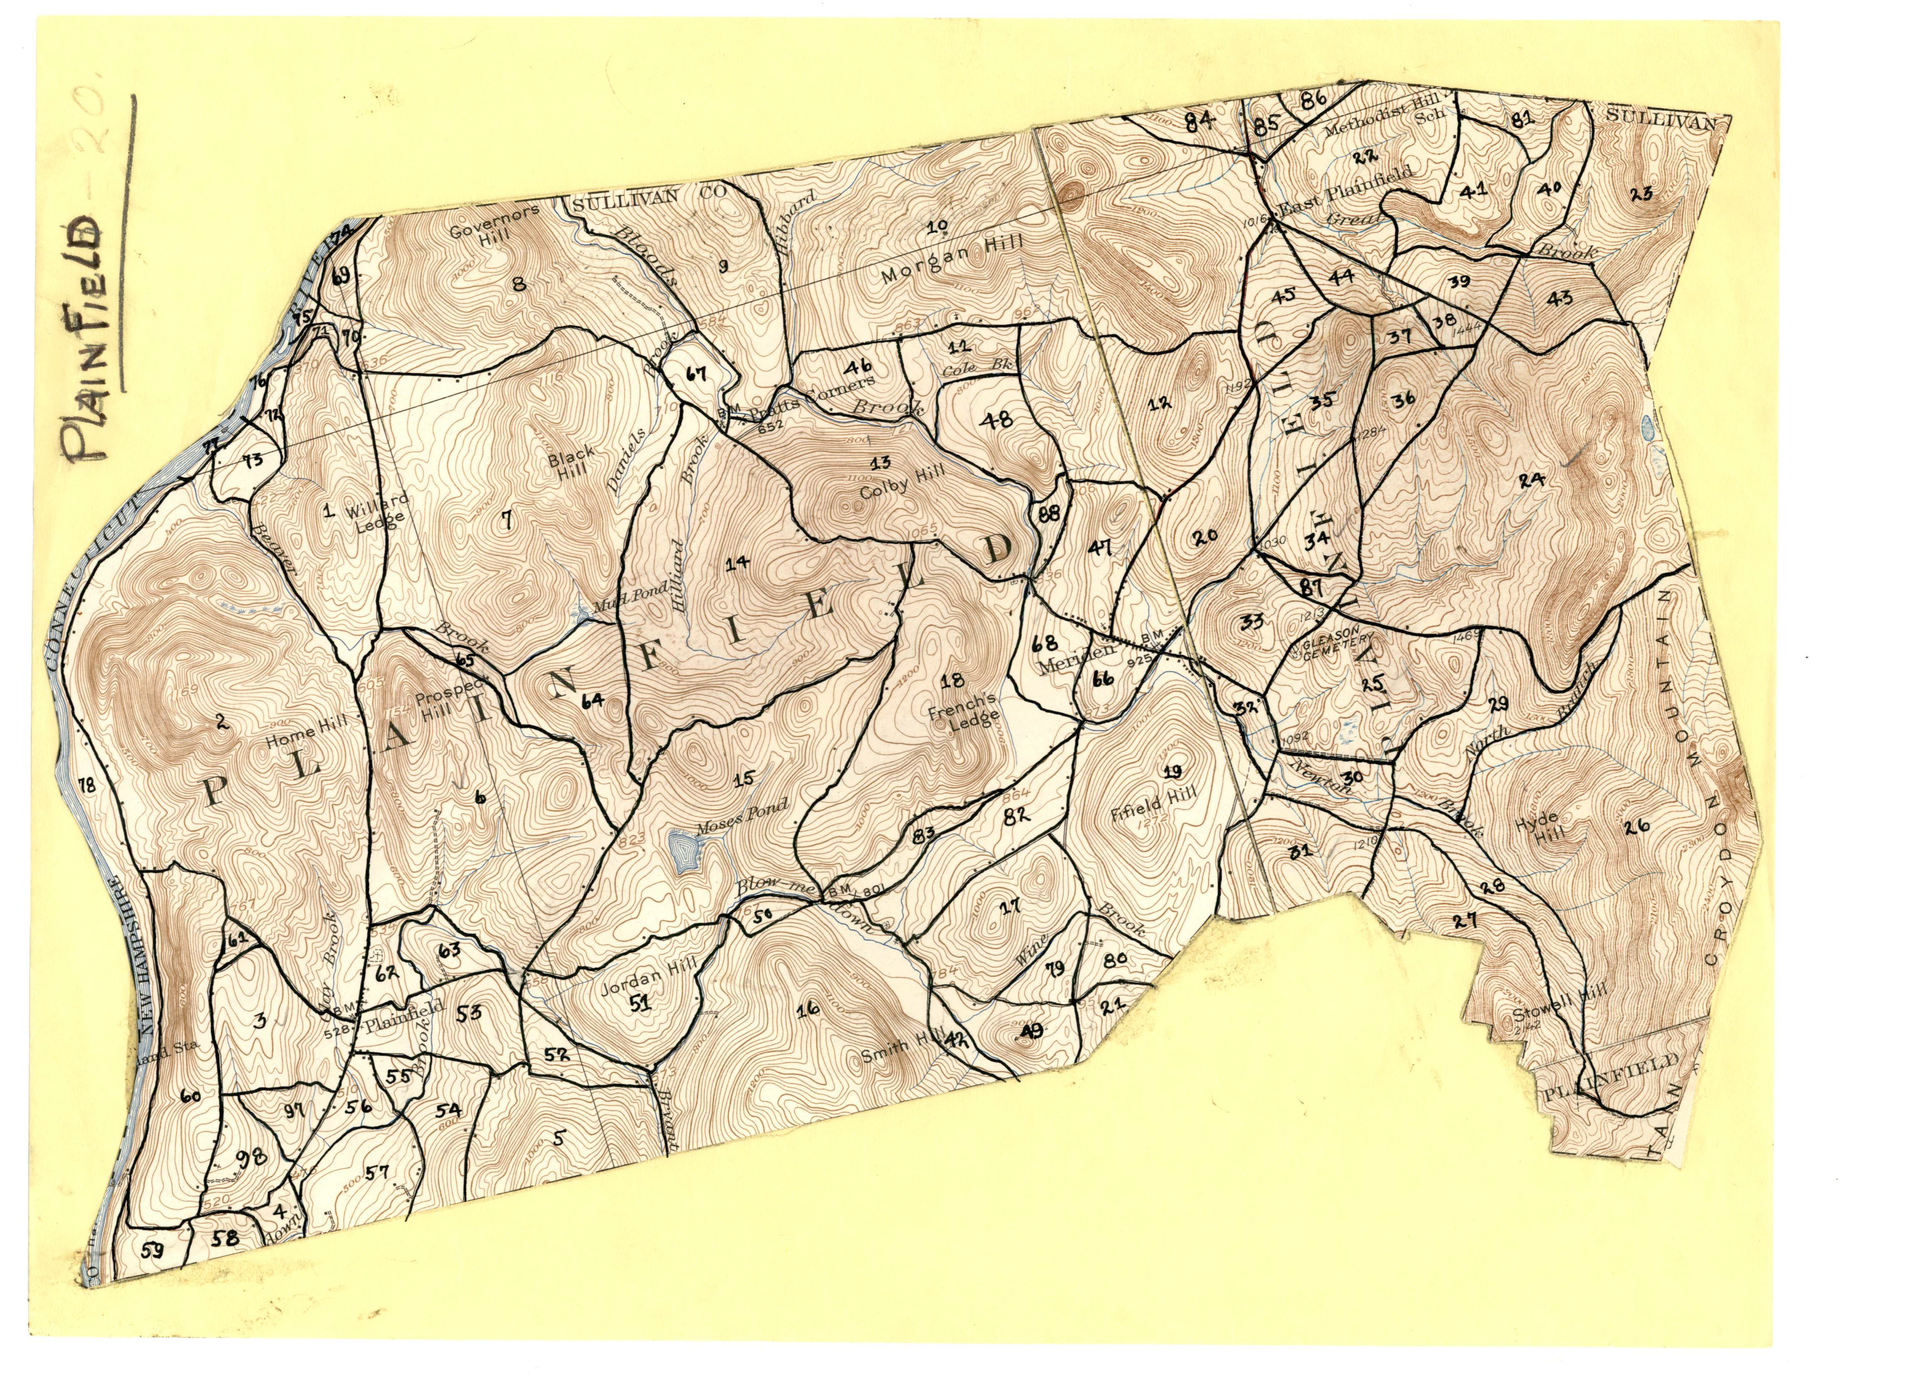 Topographic map of the Town of Plainfield, NH with Blister Rust study sections indicated.